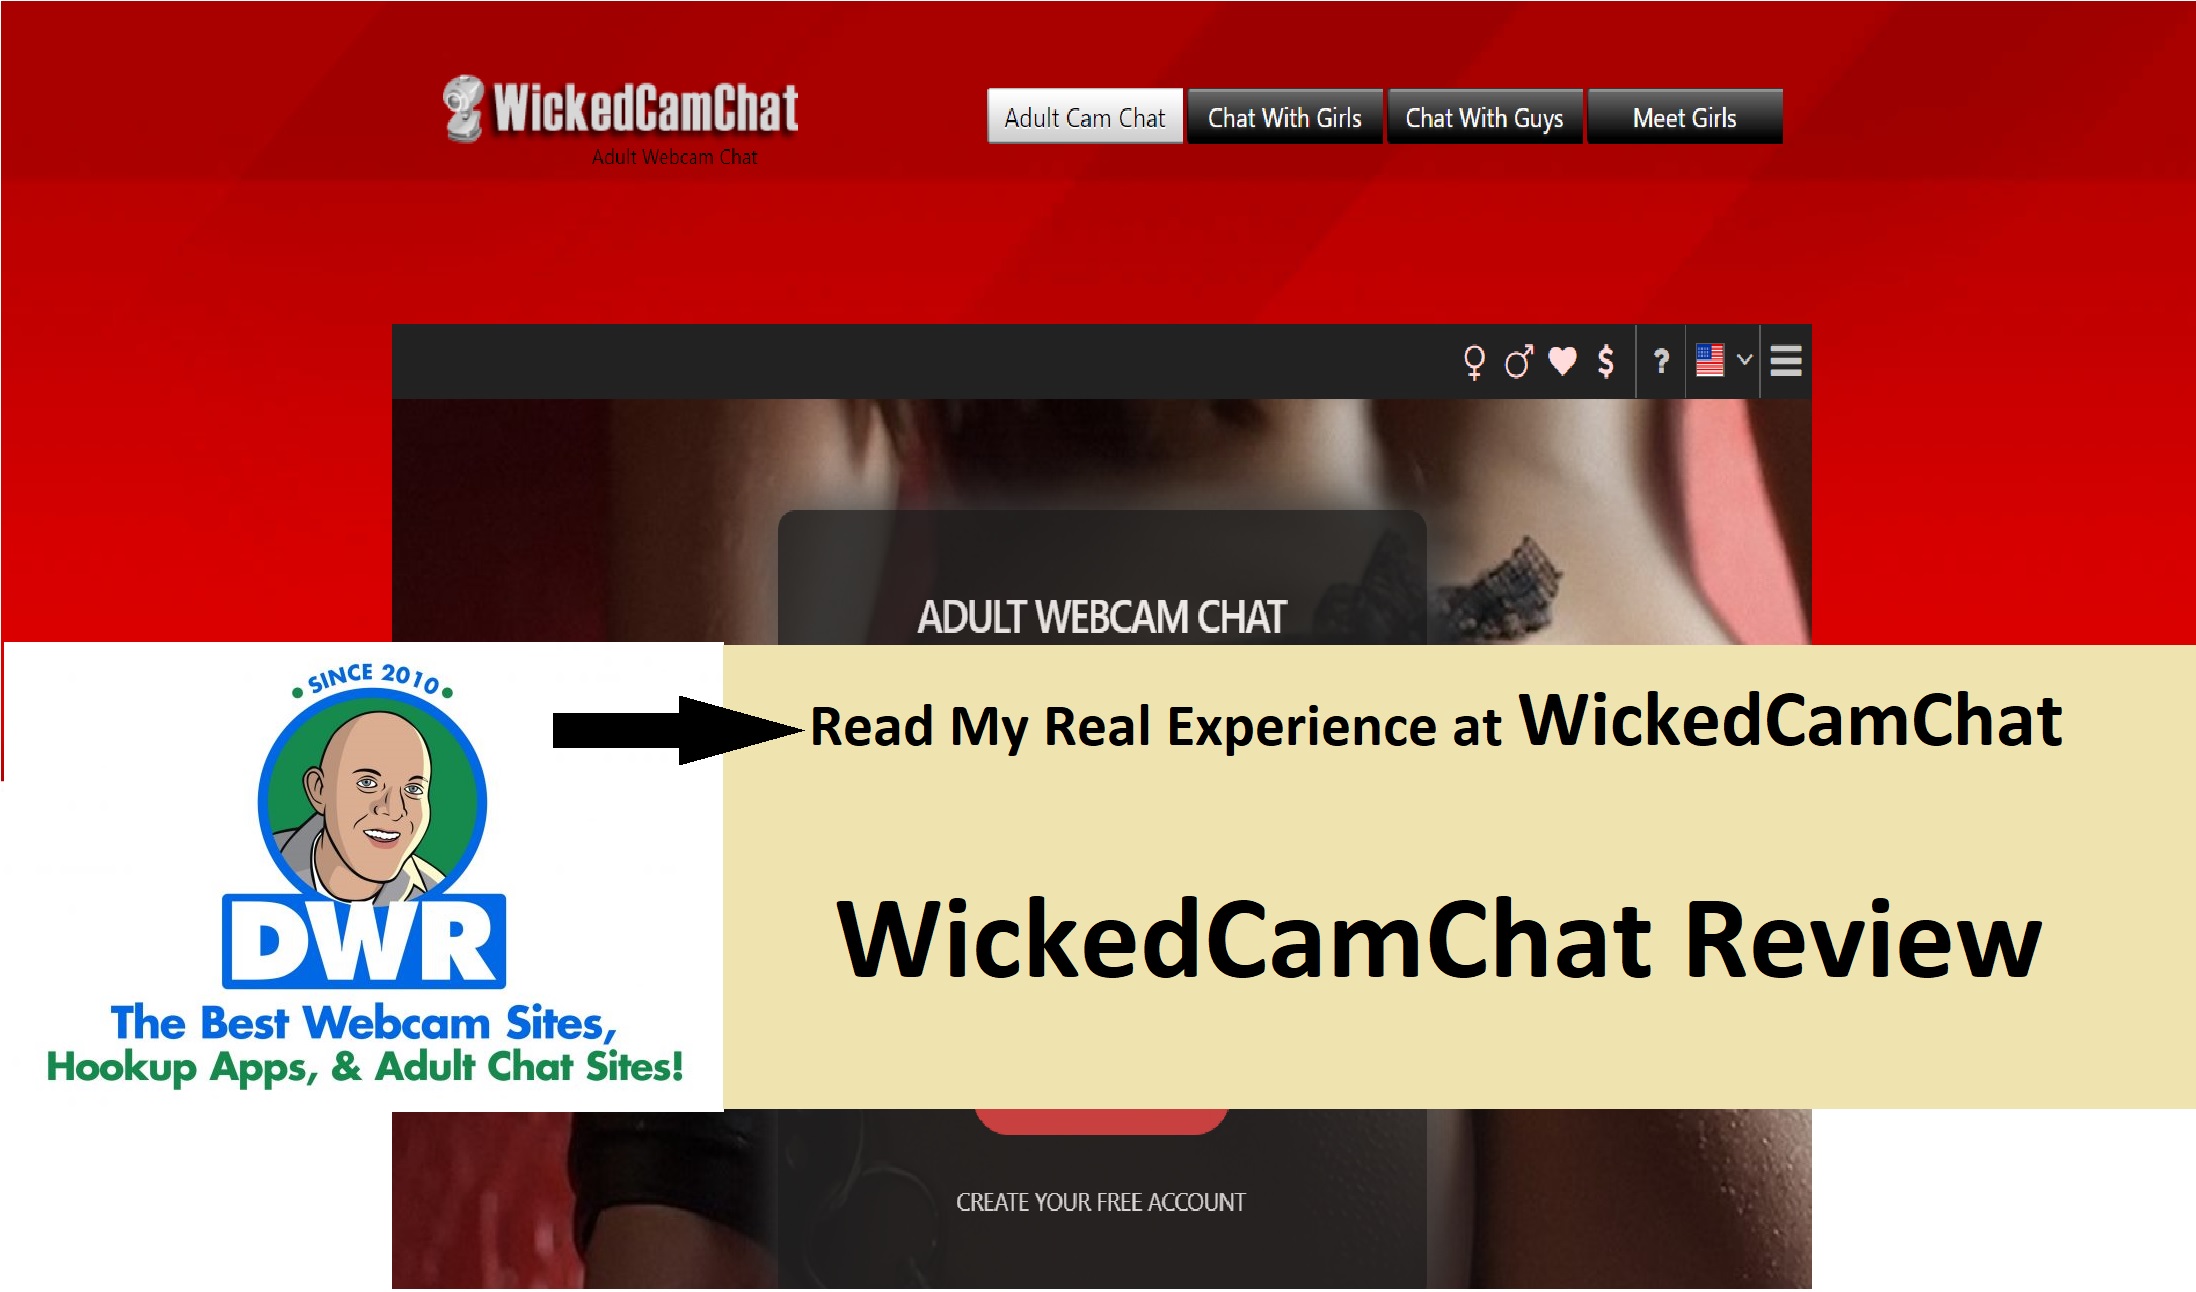 Wicked cam chat com